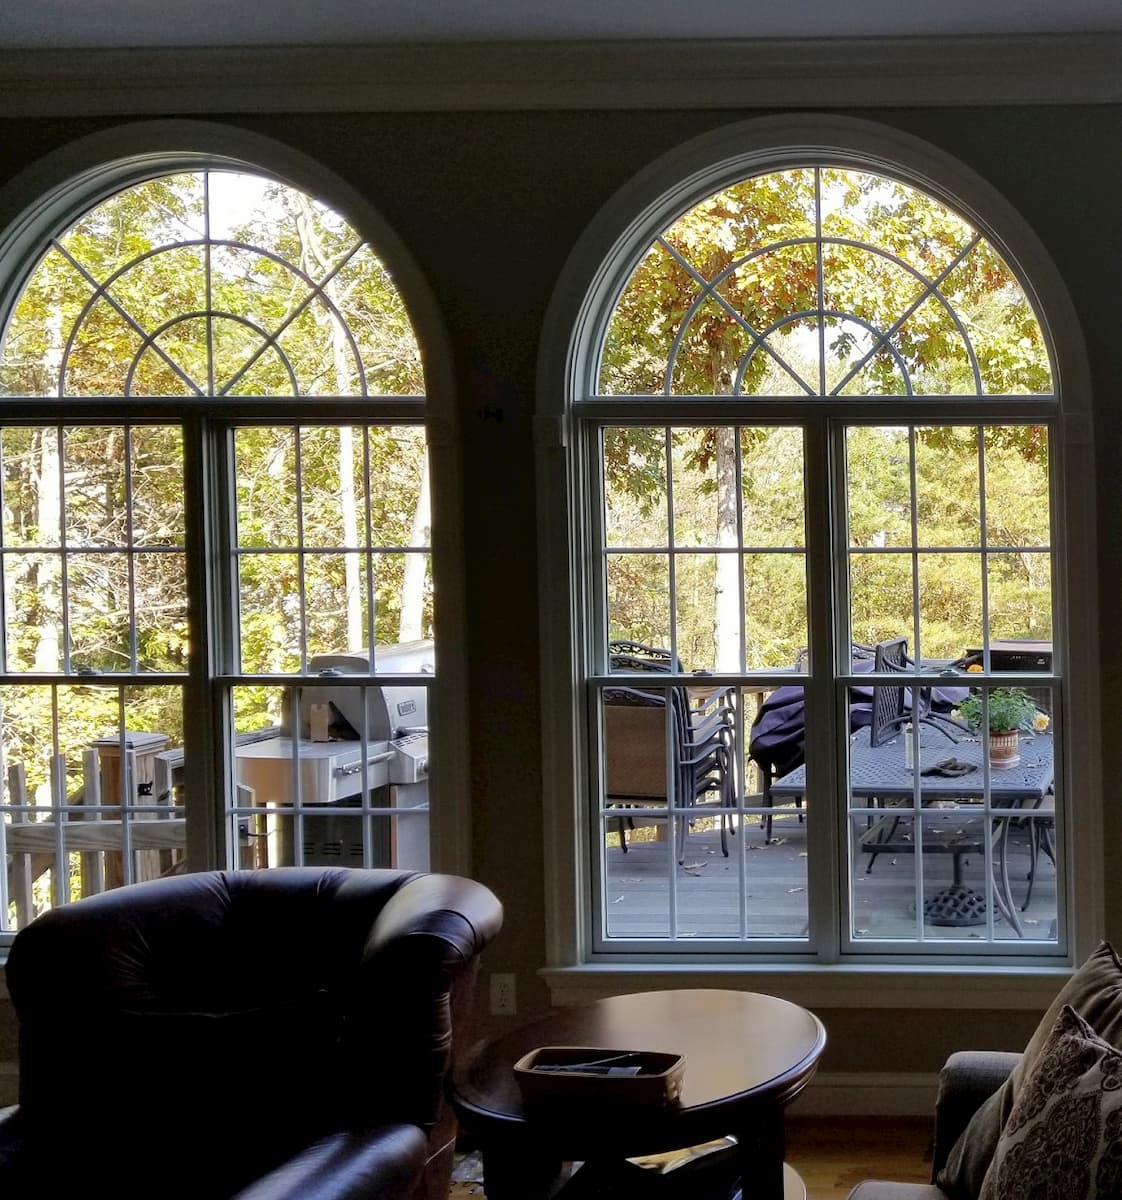 Interior view of wood double-hung windows with half-circle transoms and traditional grilles